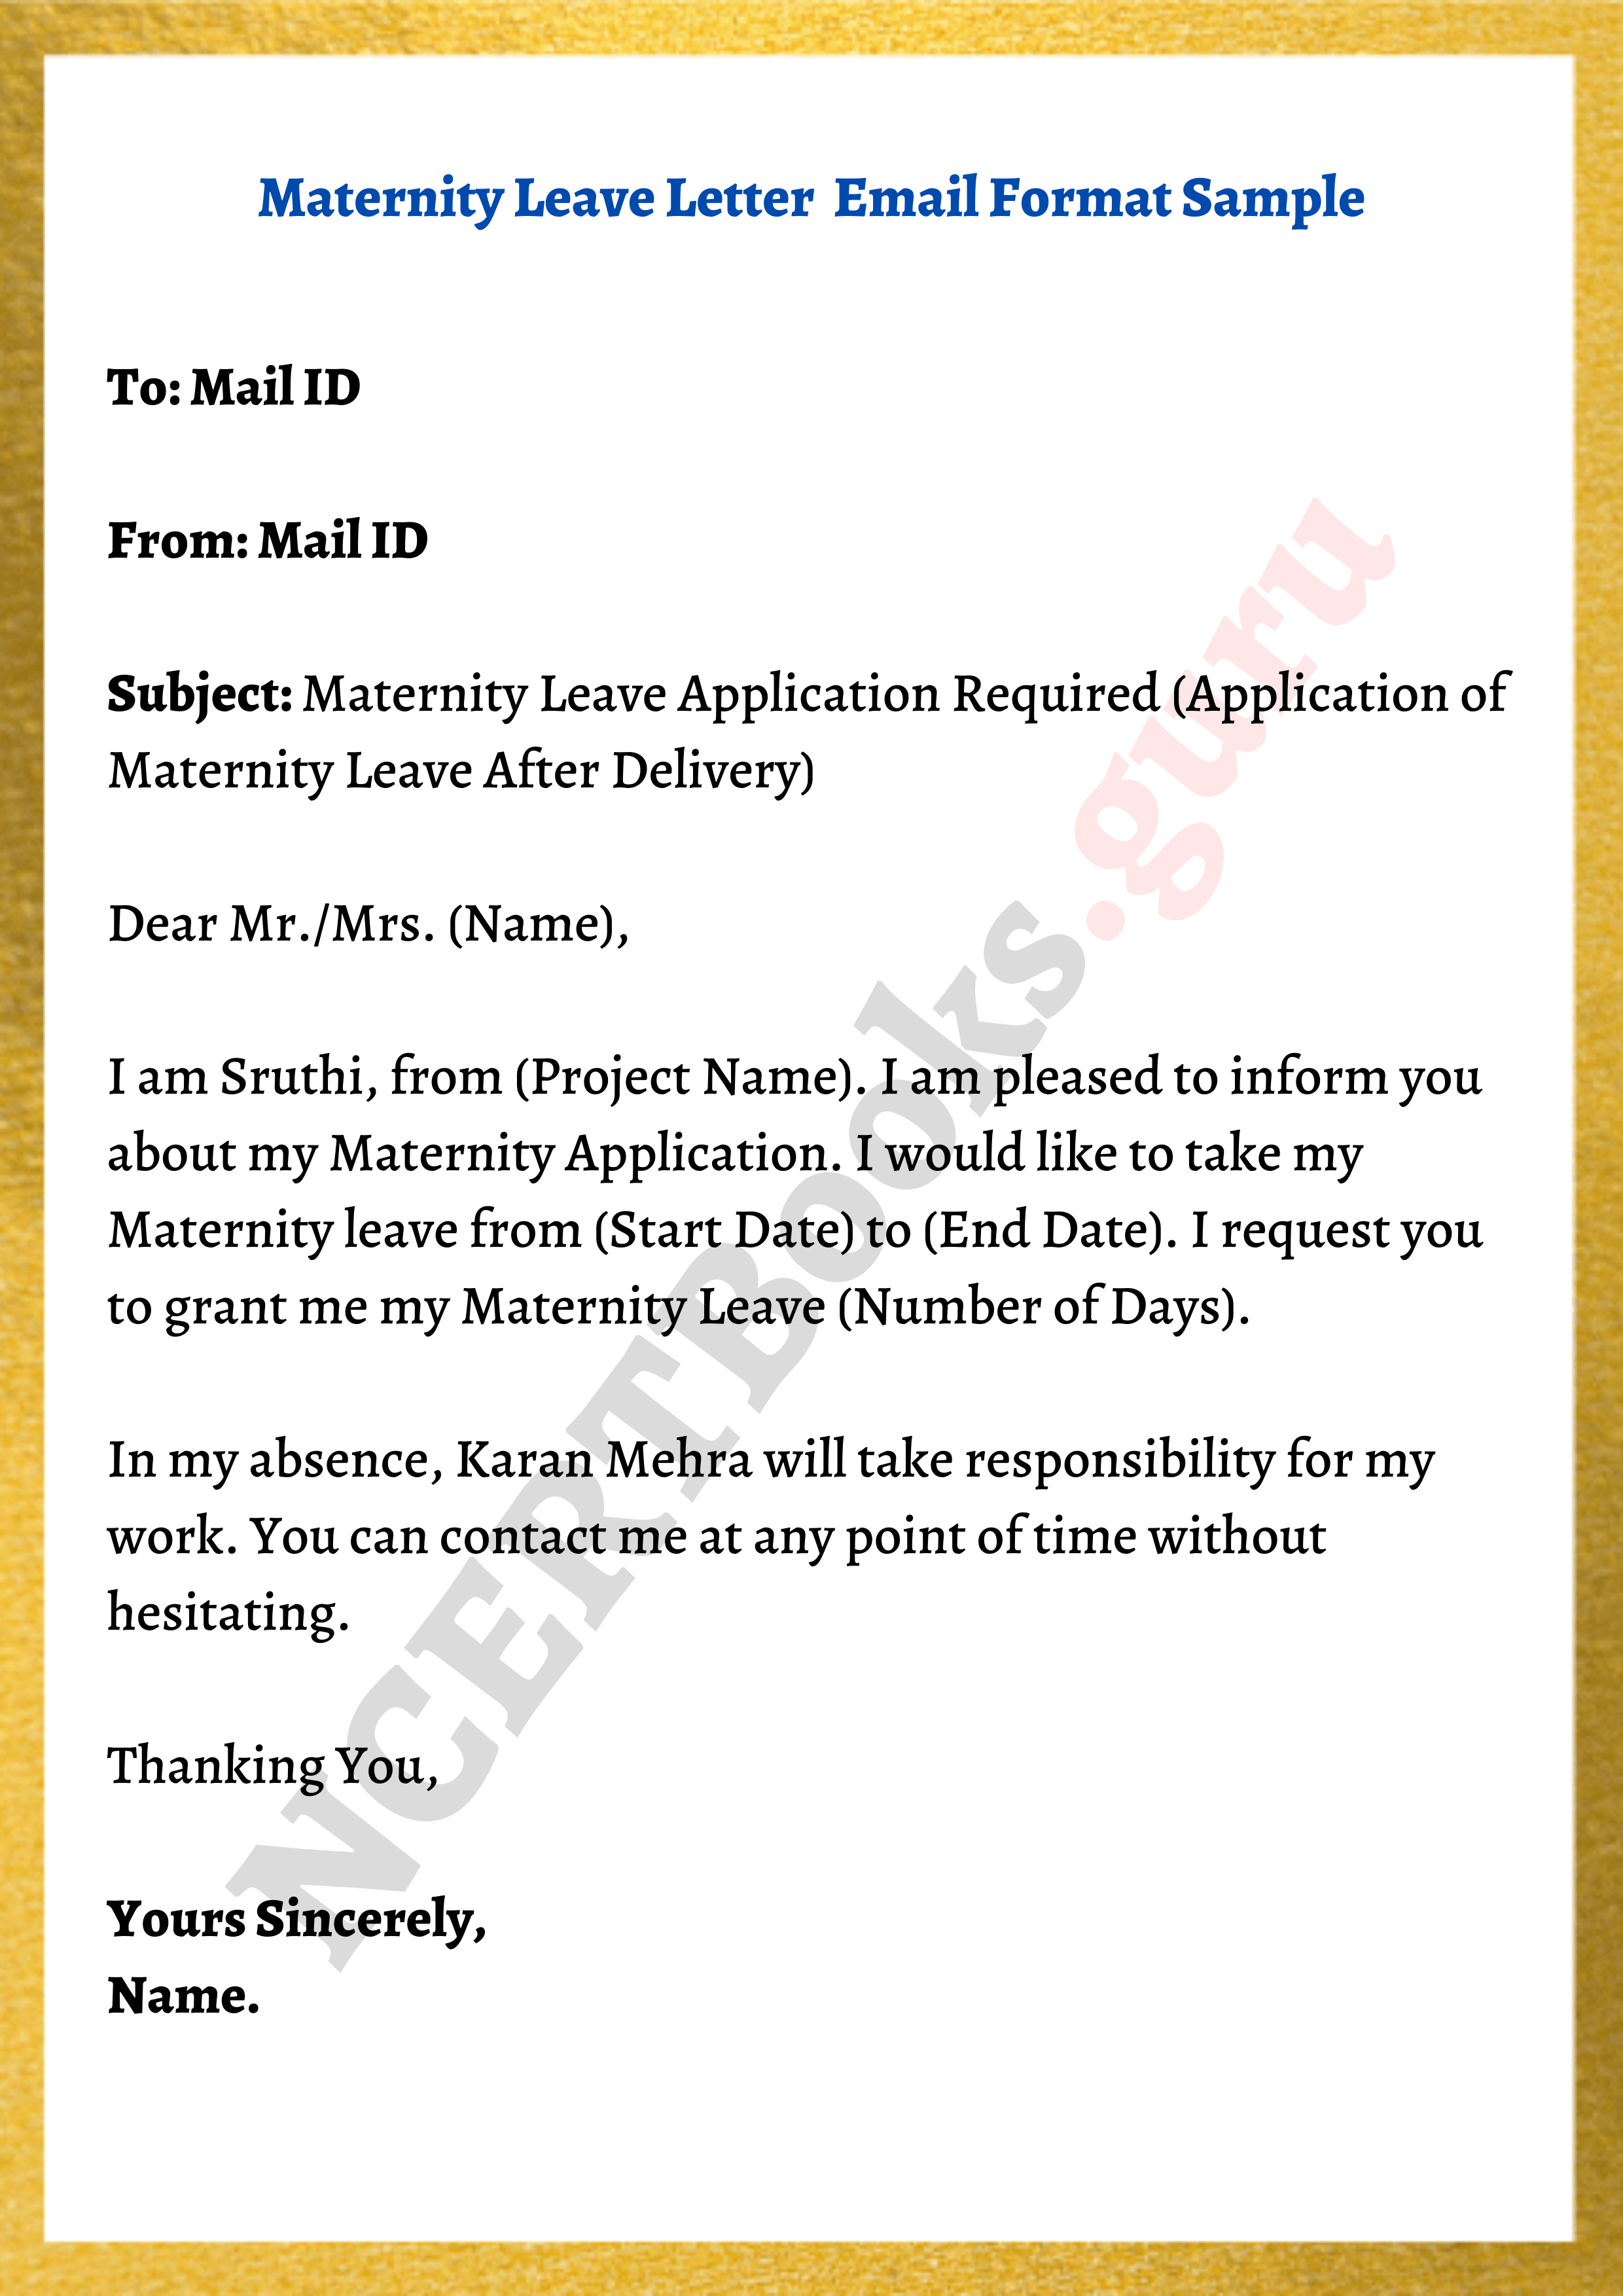 Format For Maternity Leave Application